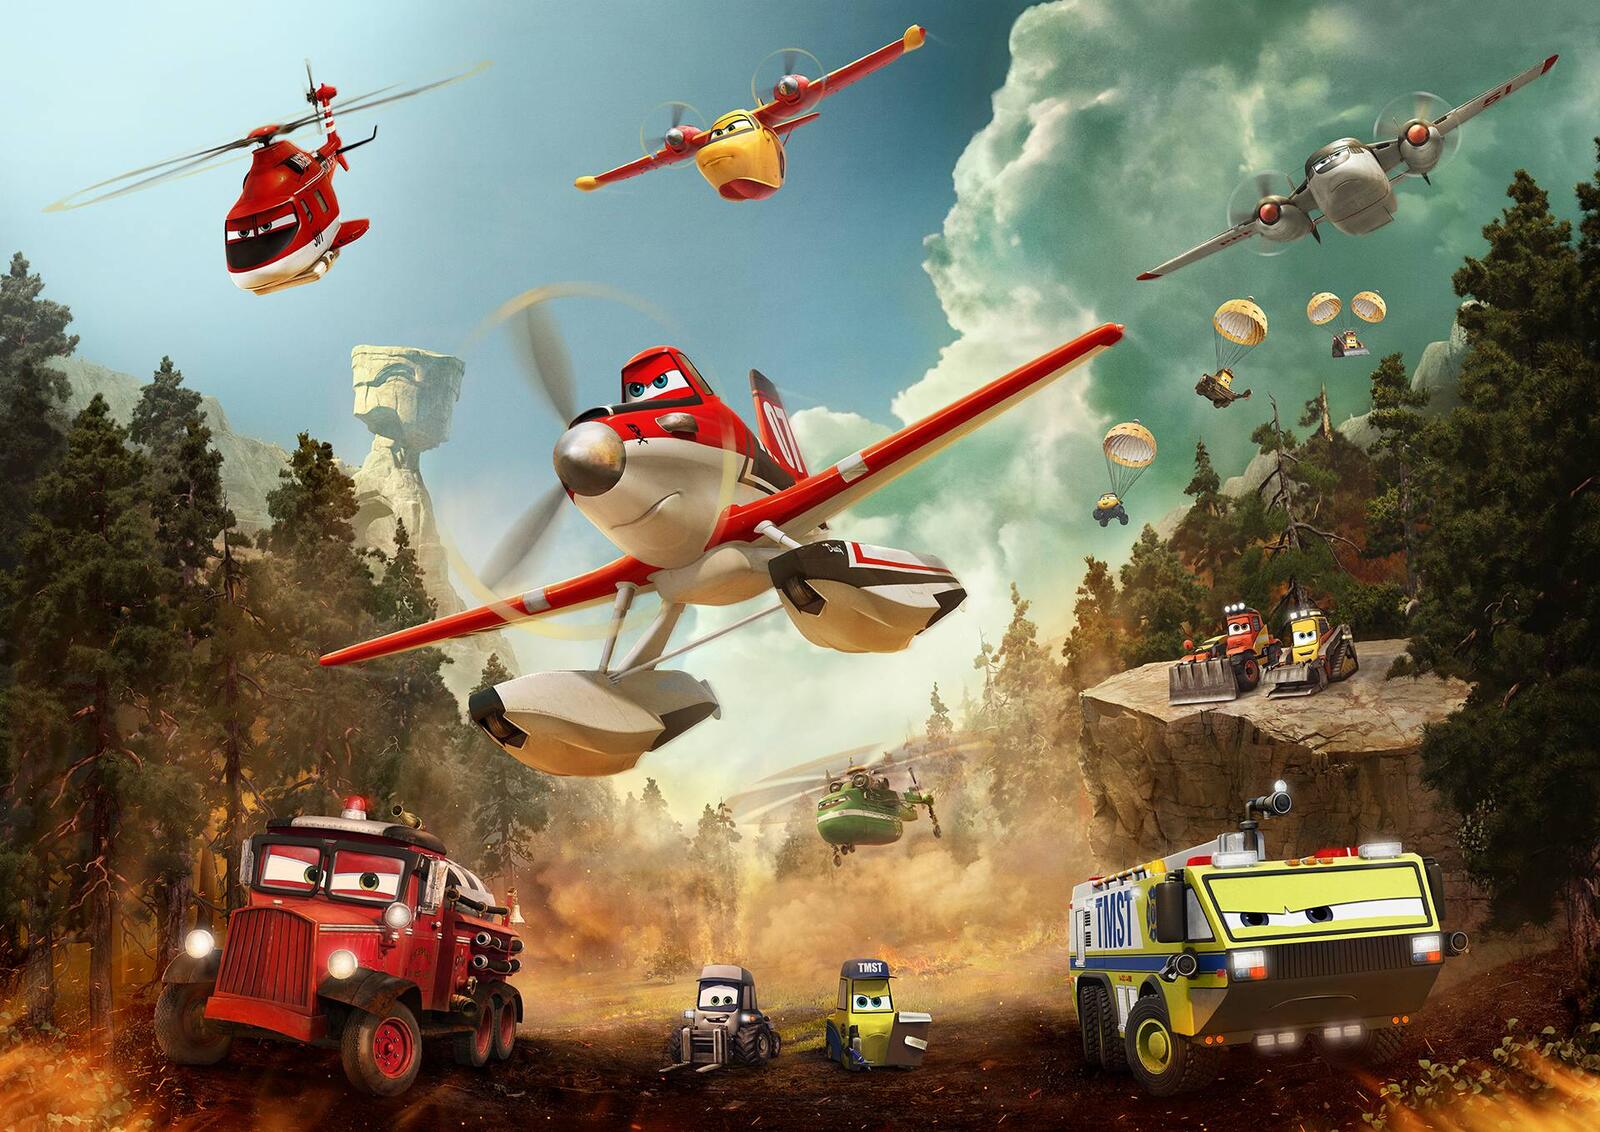 Wallpapers comedy Planes: Fire and water family on the desktop